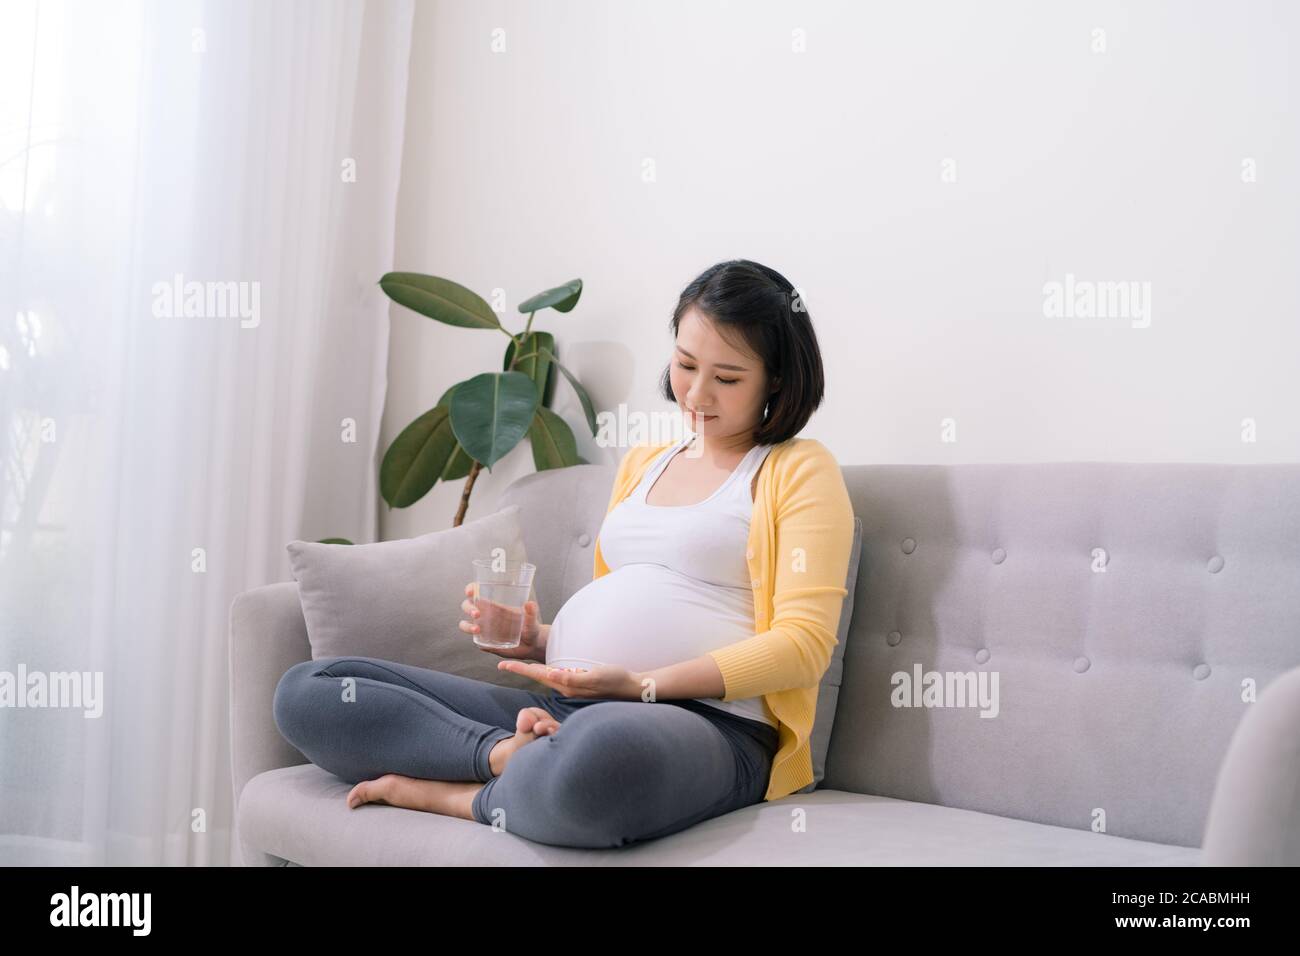 Young pregnant woman taking medicine Stock Photo